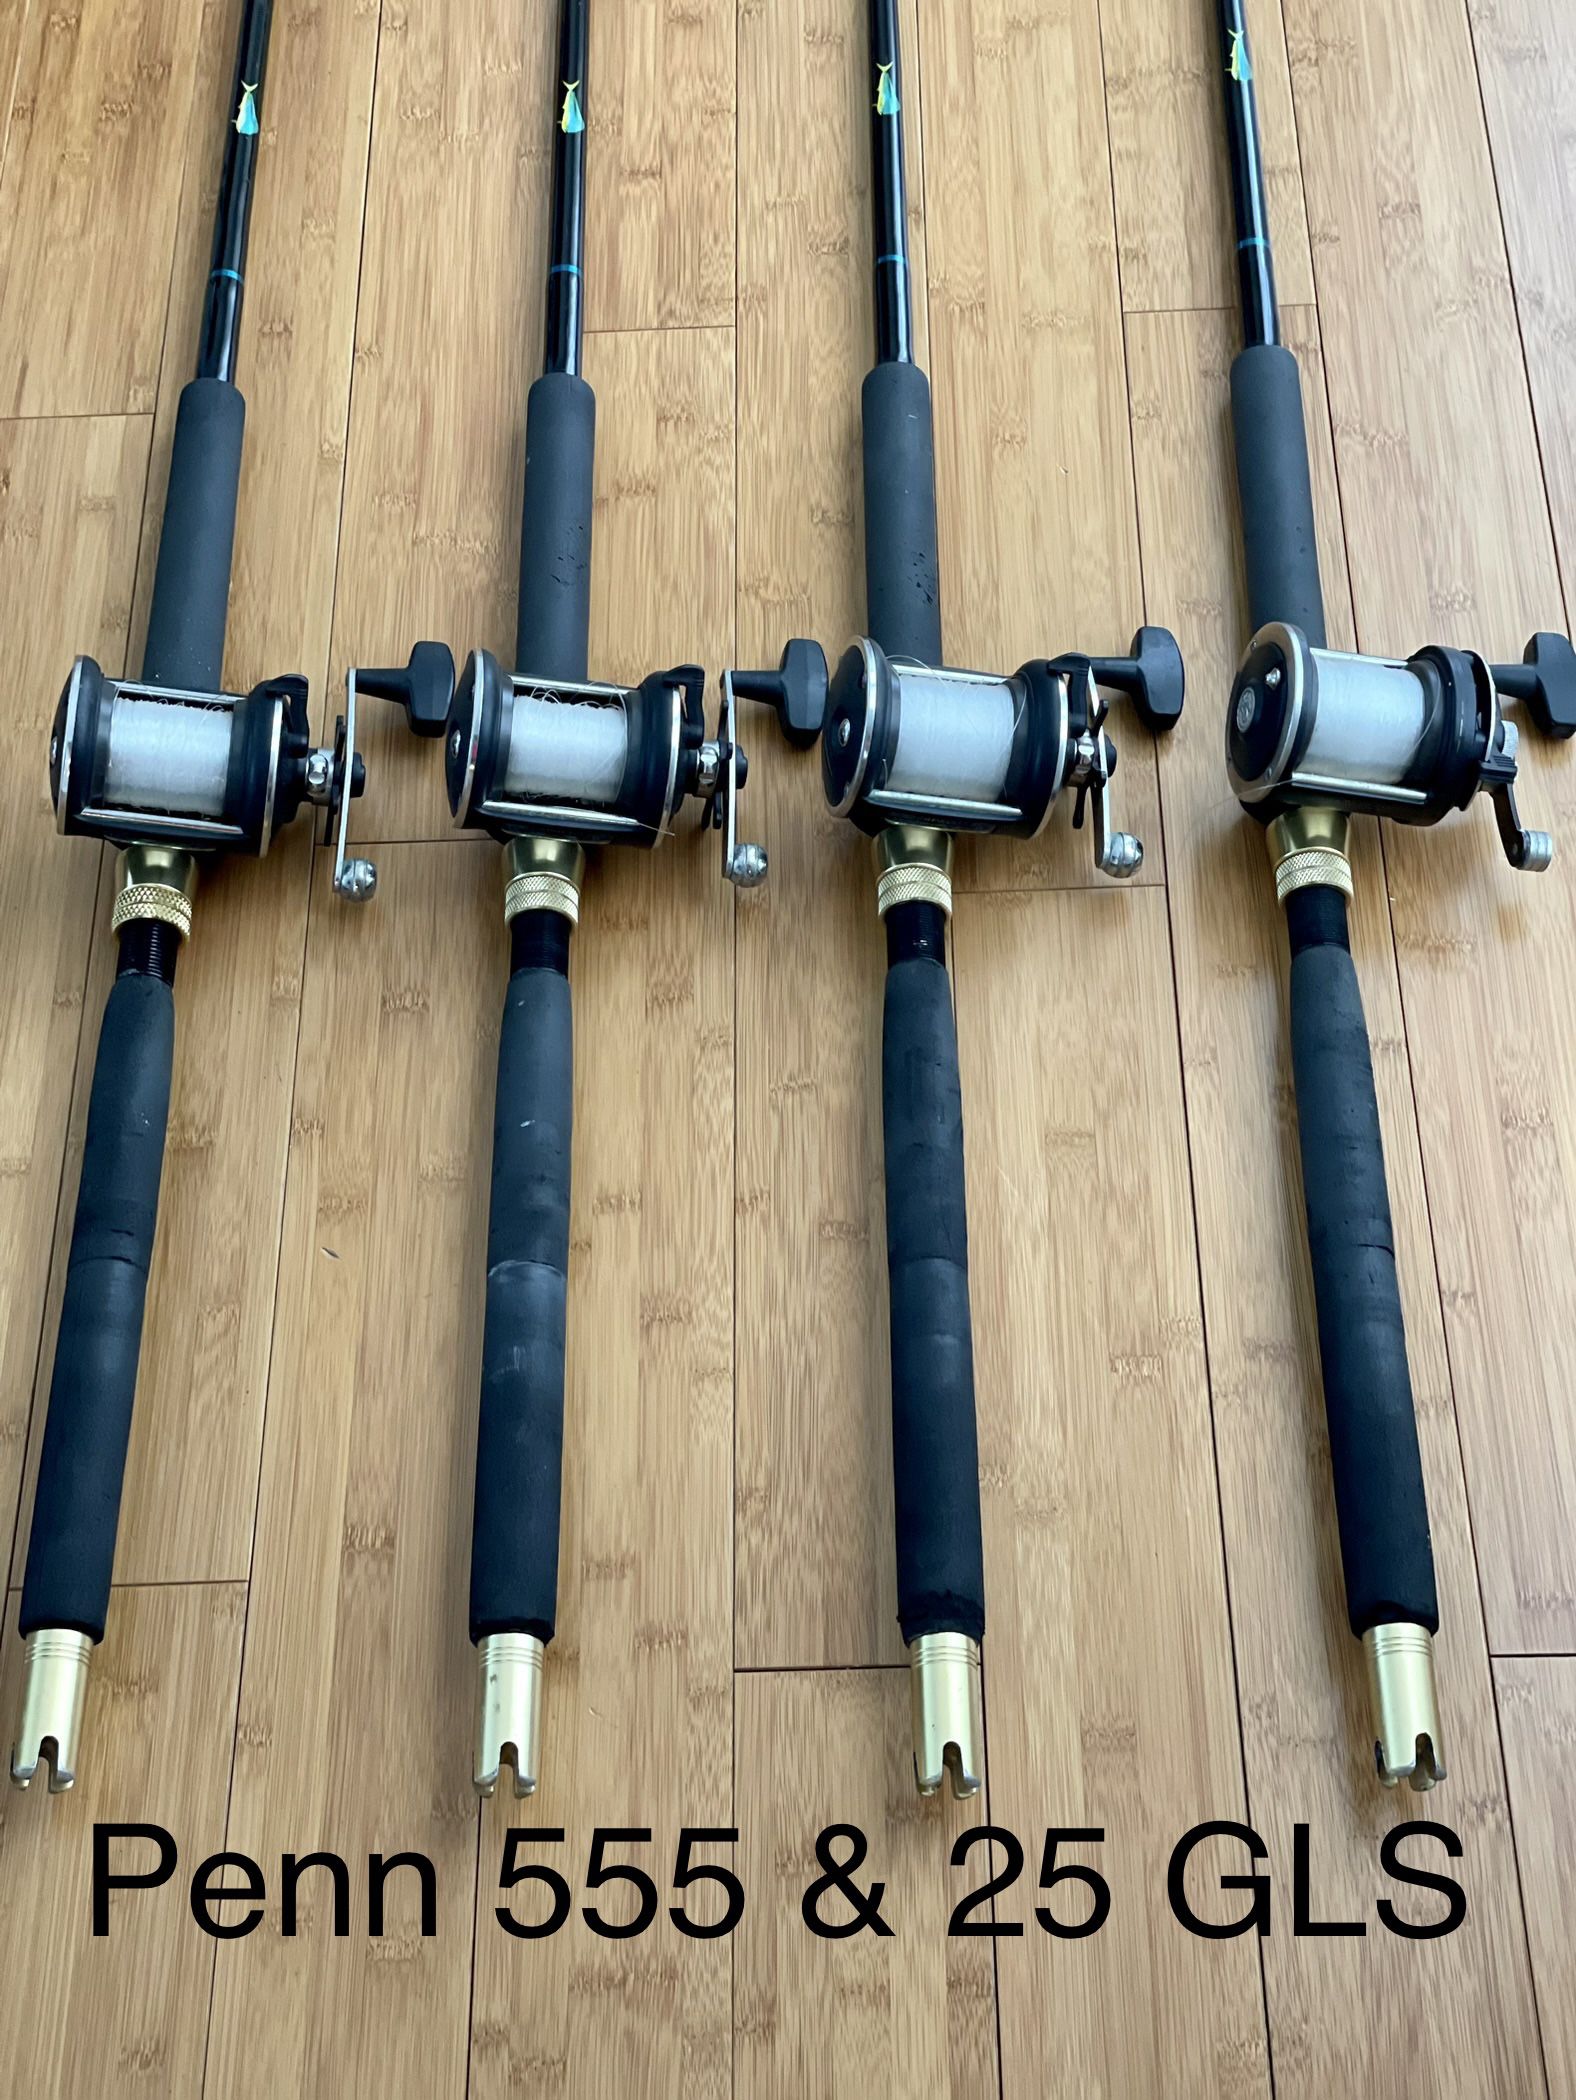 Fishing Rods and Reels  Penn, 555 and 25 GLS